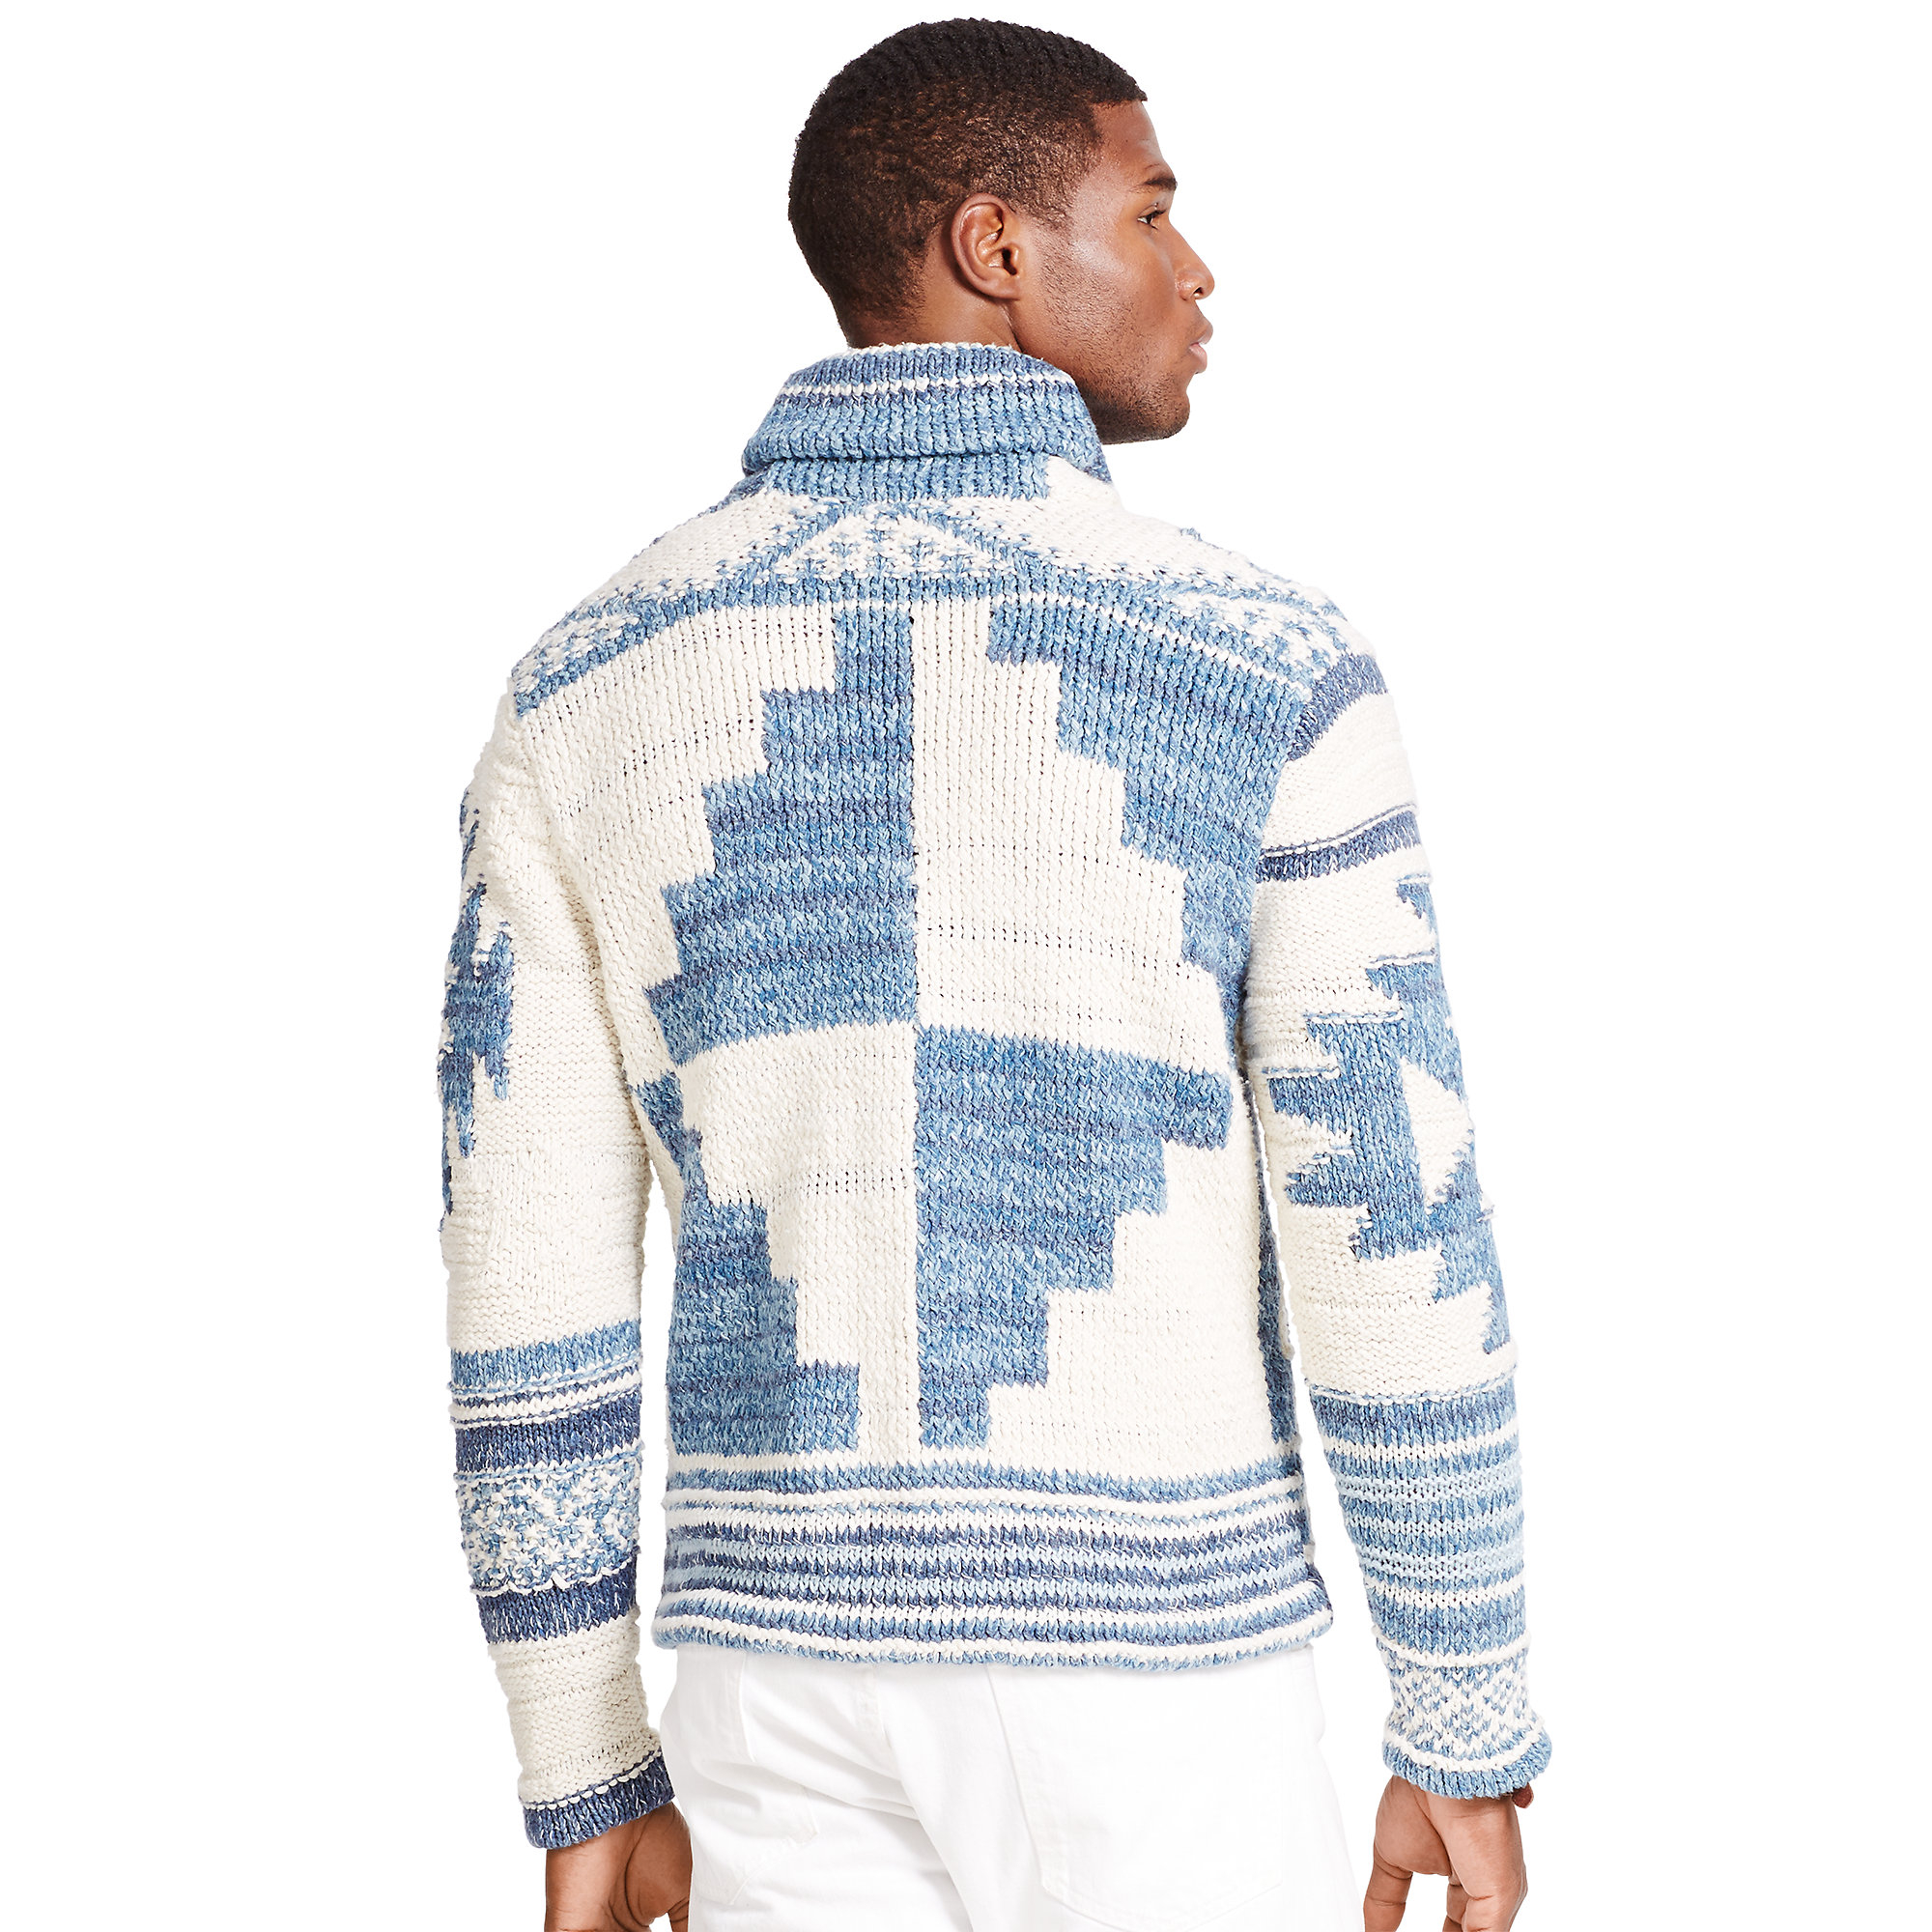 south western sweater